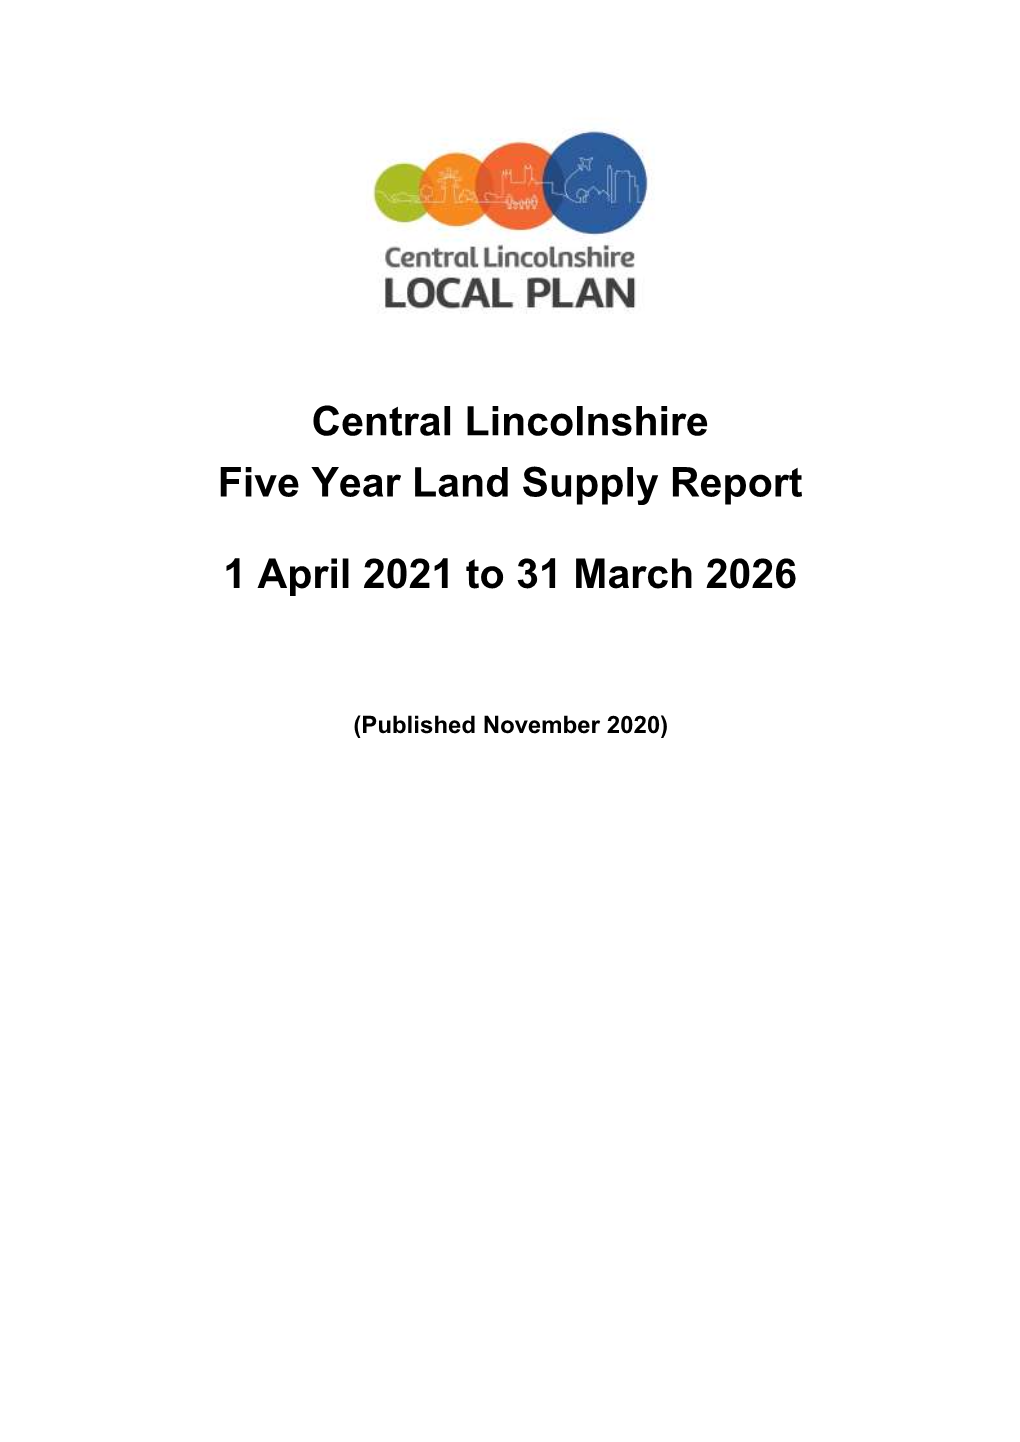 Central Lincolnshire Five Year Land Supply Report 1 April 2021 to 31